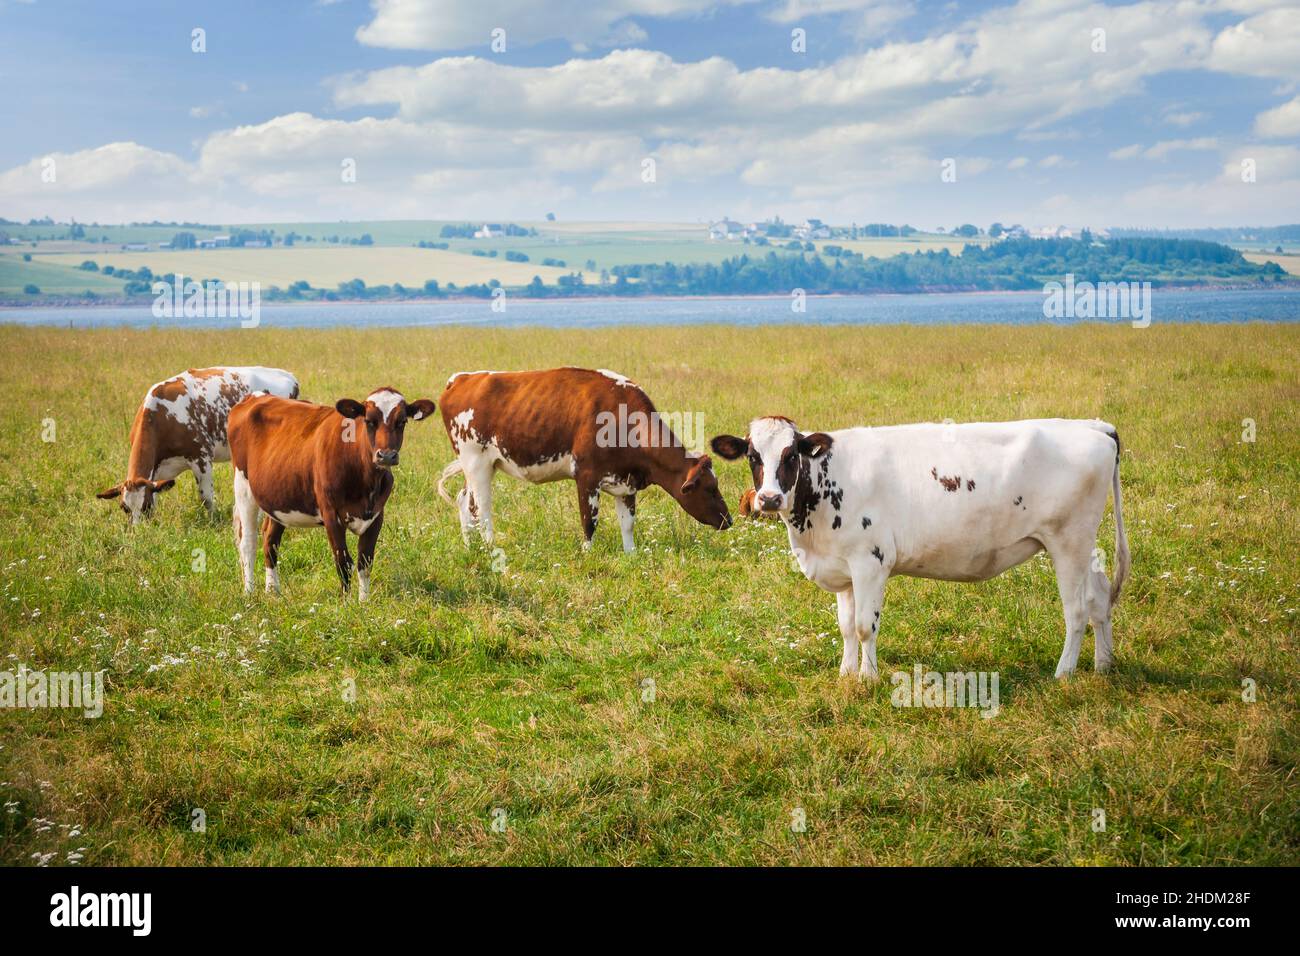 cows, Ayrshire, cow Stock Photo